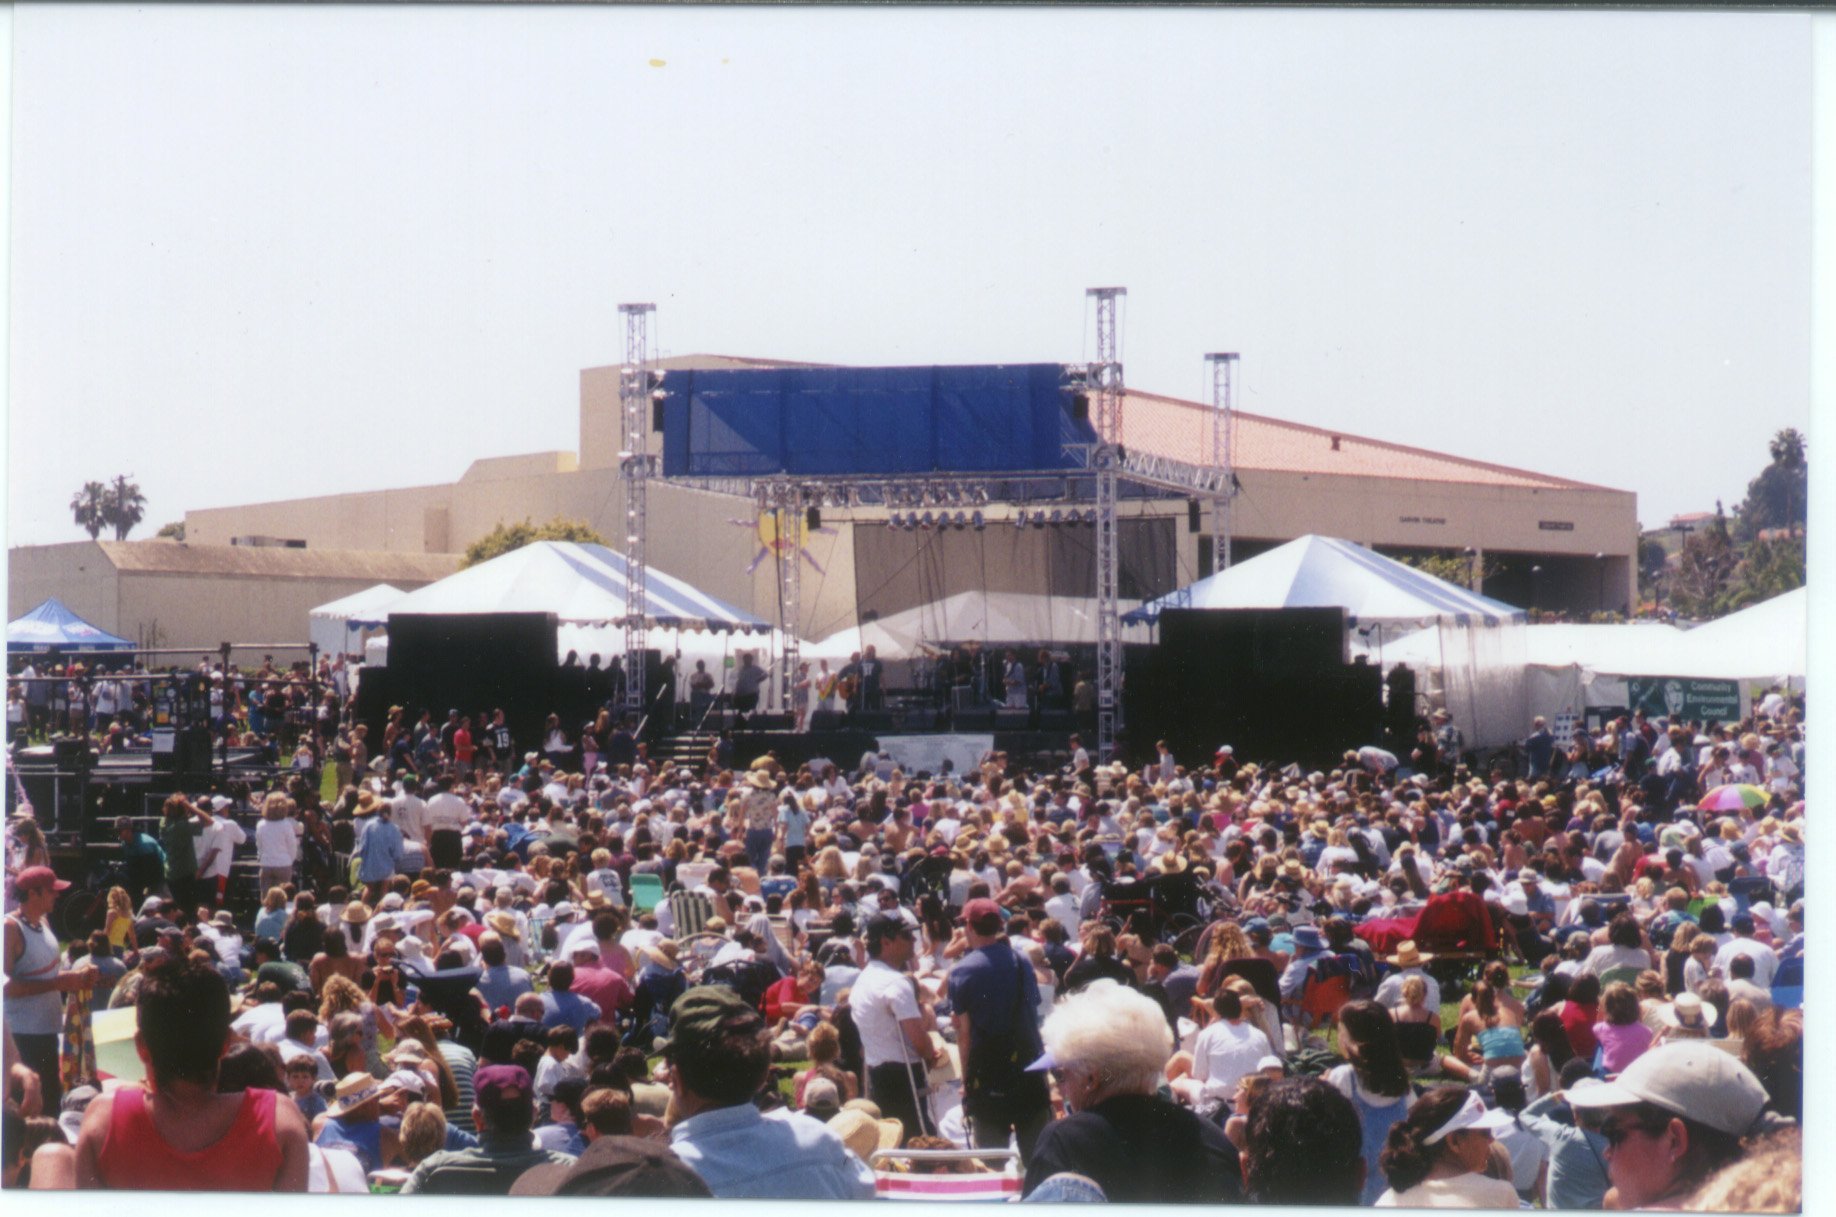  Earth Day stage and crowd. 